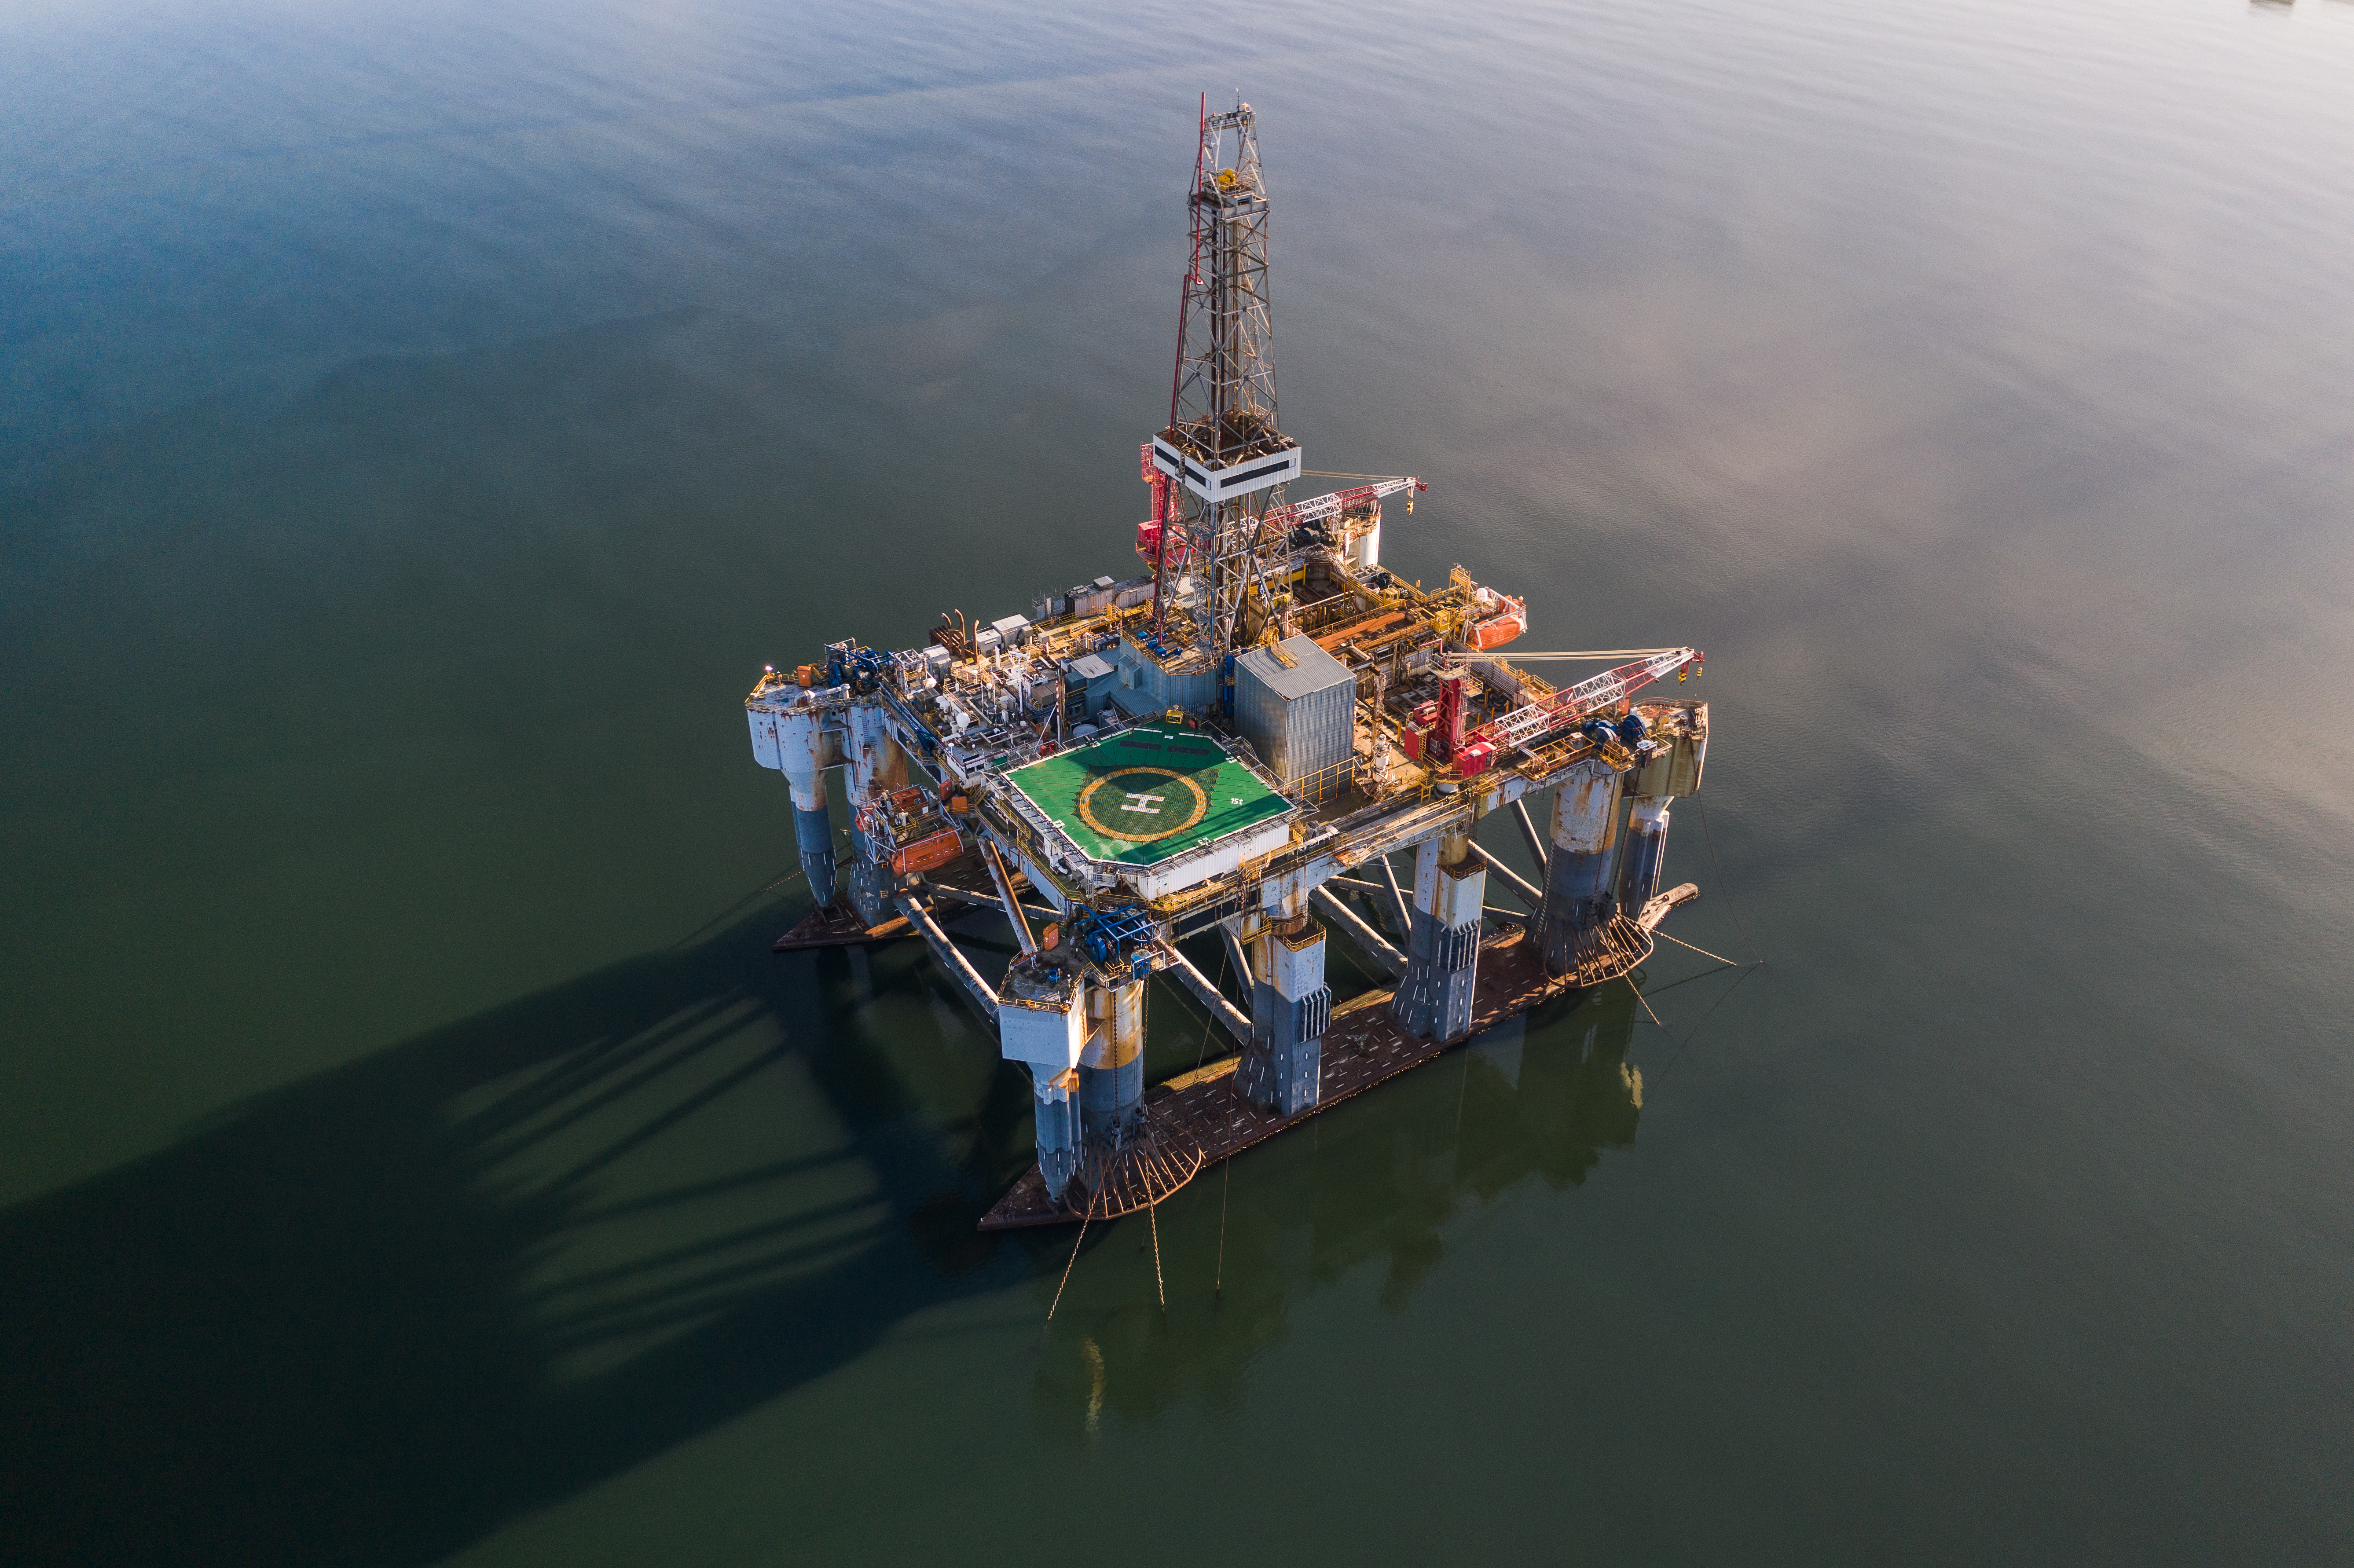 Enterprise mobility solutions help remote oil rigs stay in communication with the shore.